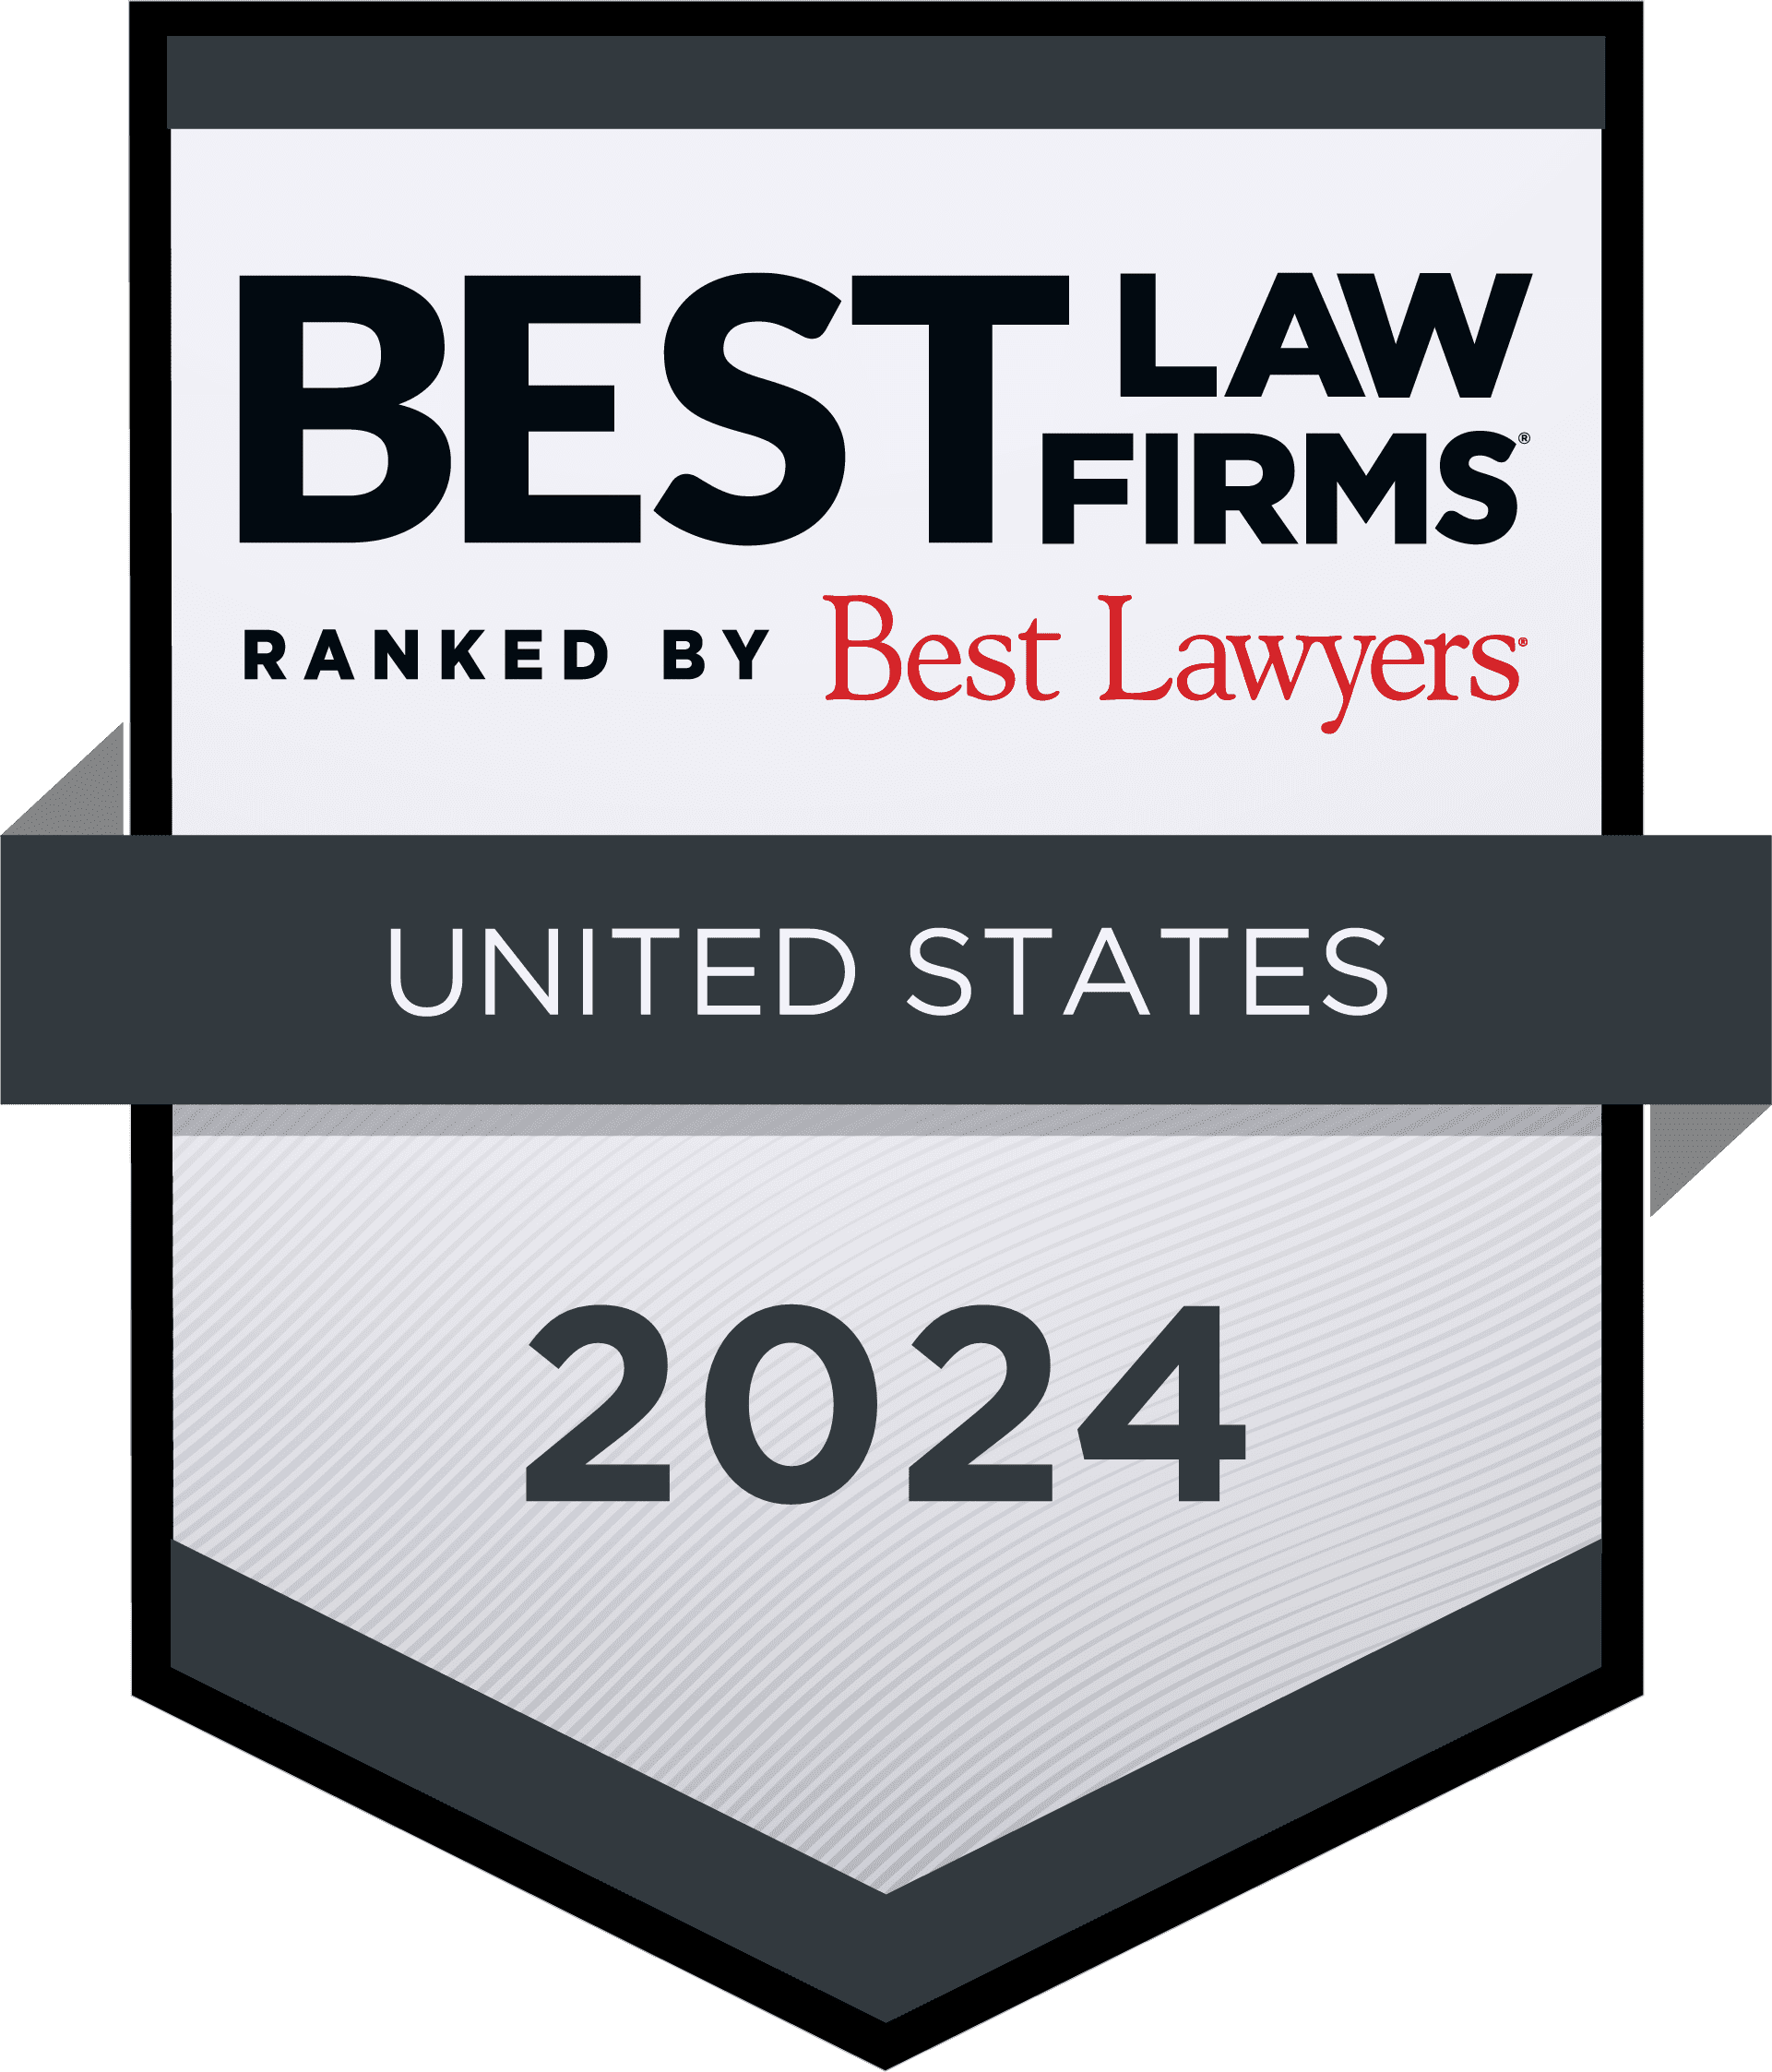 SR Ranked as Best Law Firm® by Best Lawyers®